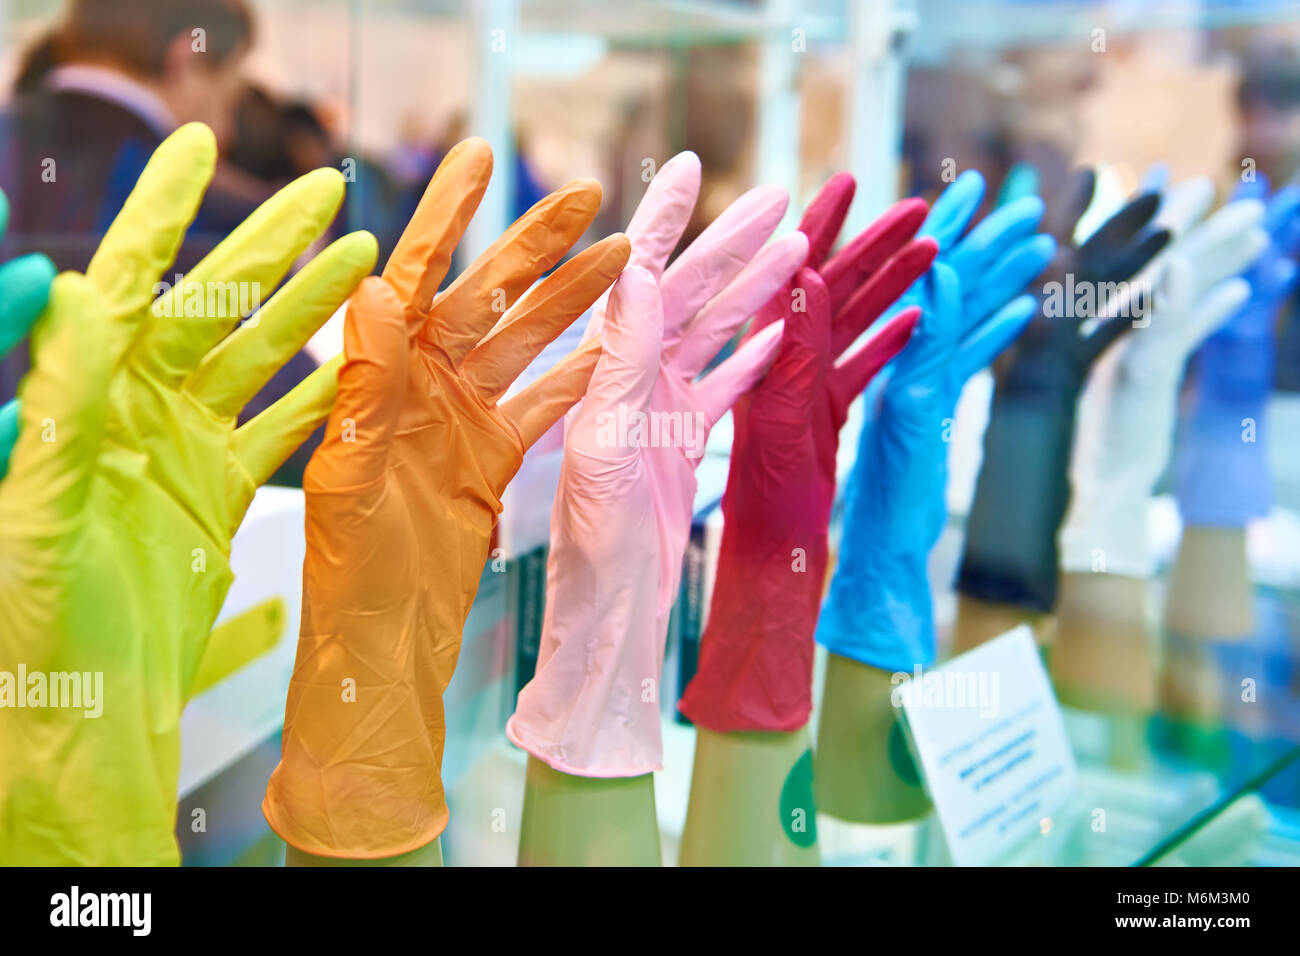 Colorful medical rubber gloves for doctors Stock Photo